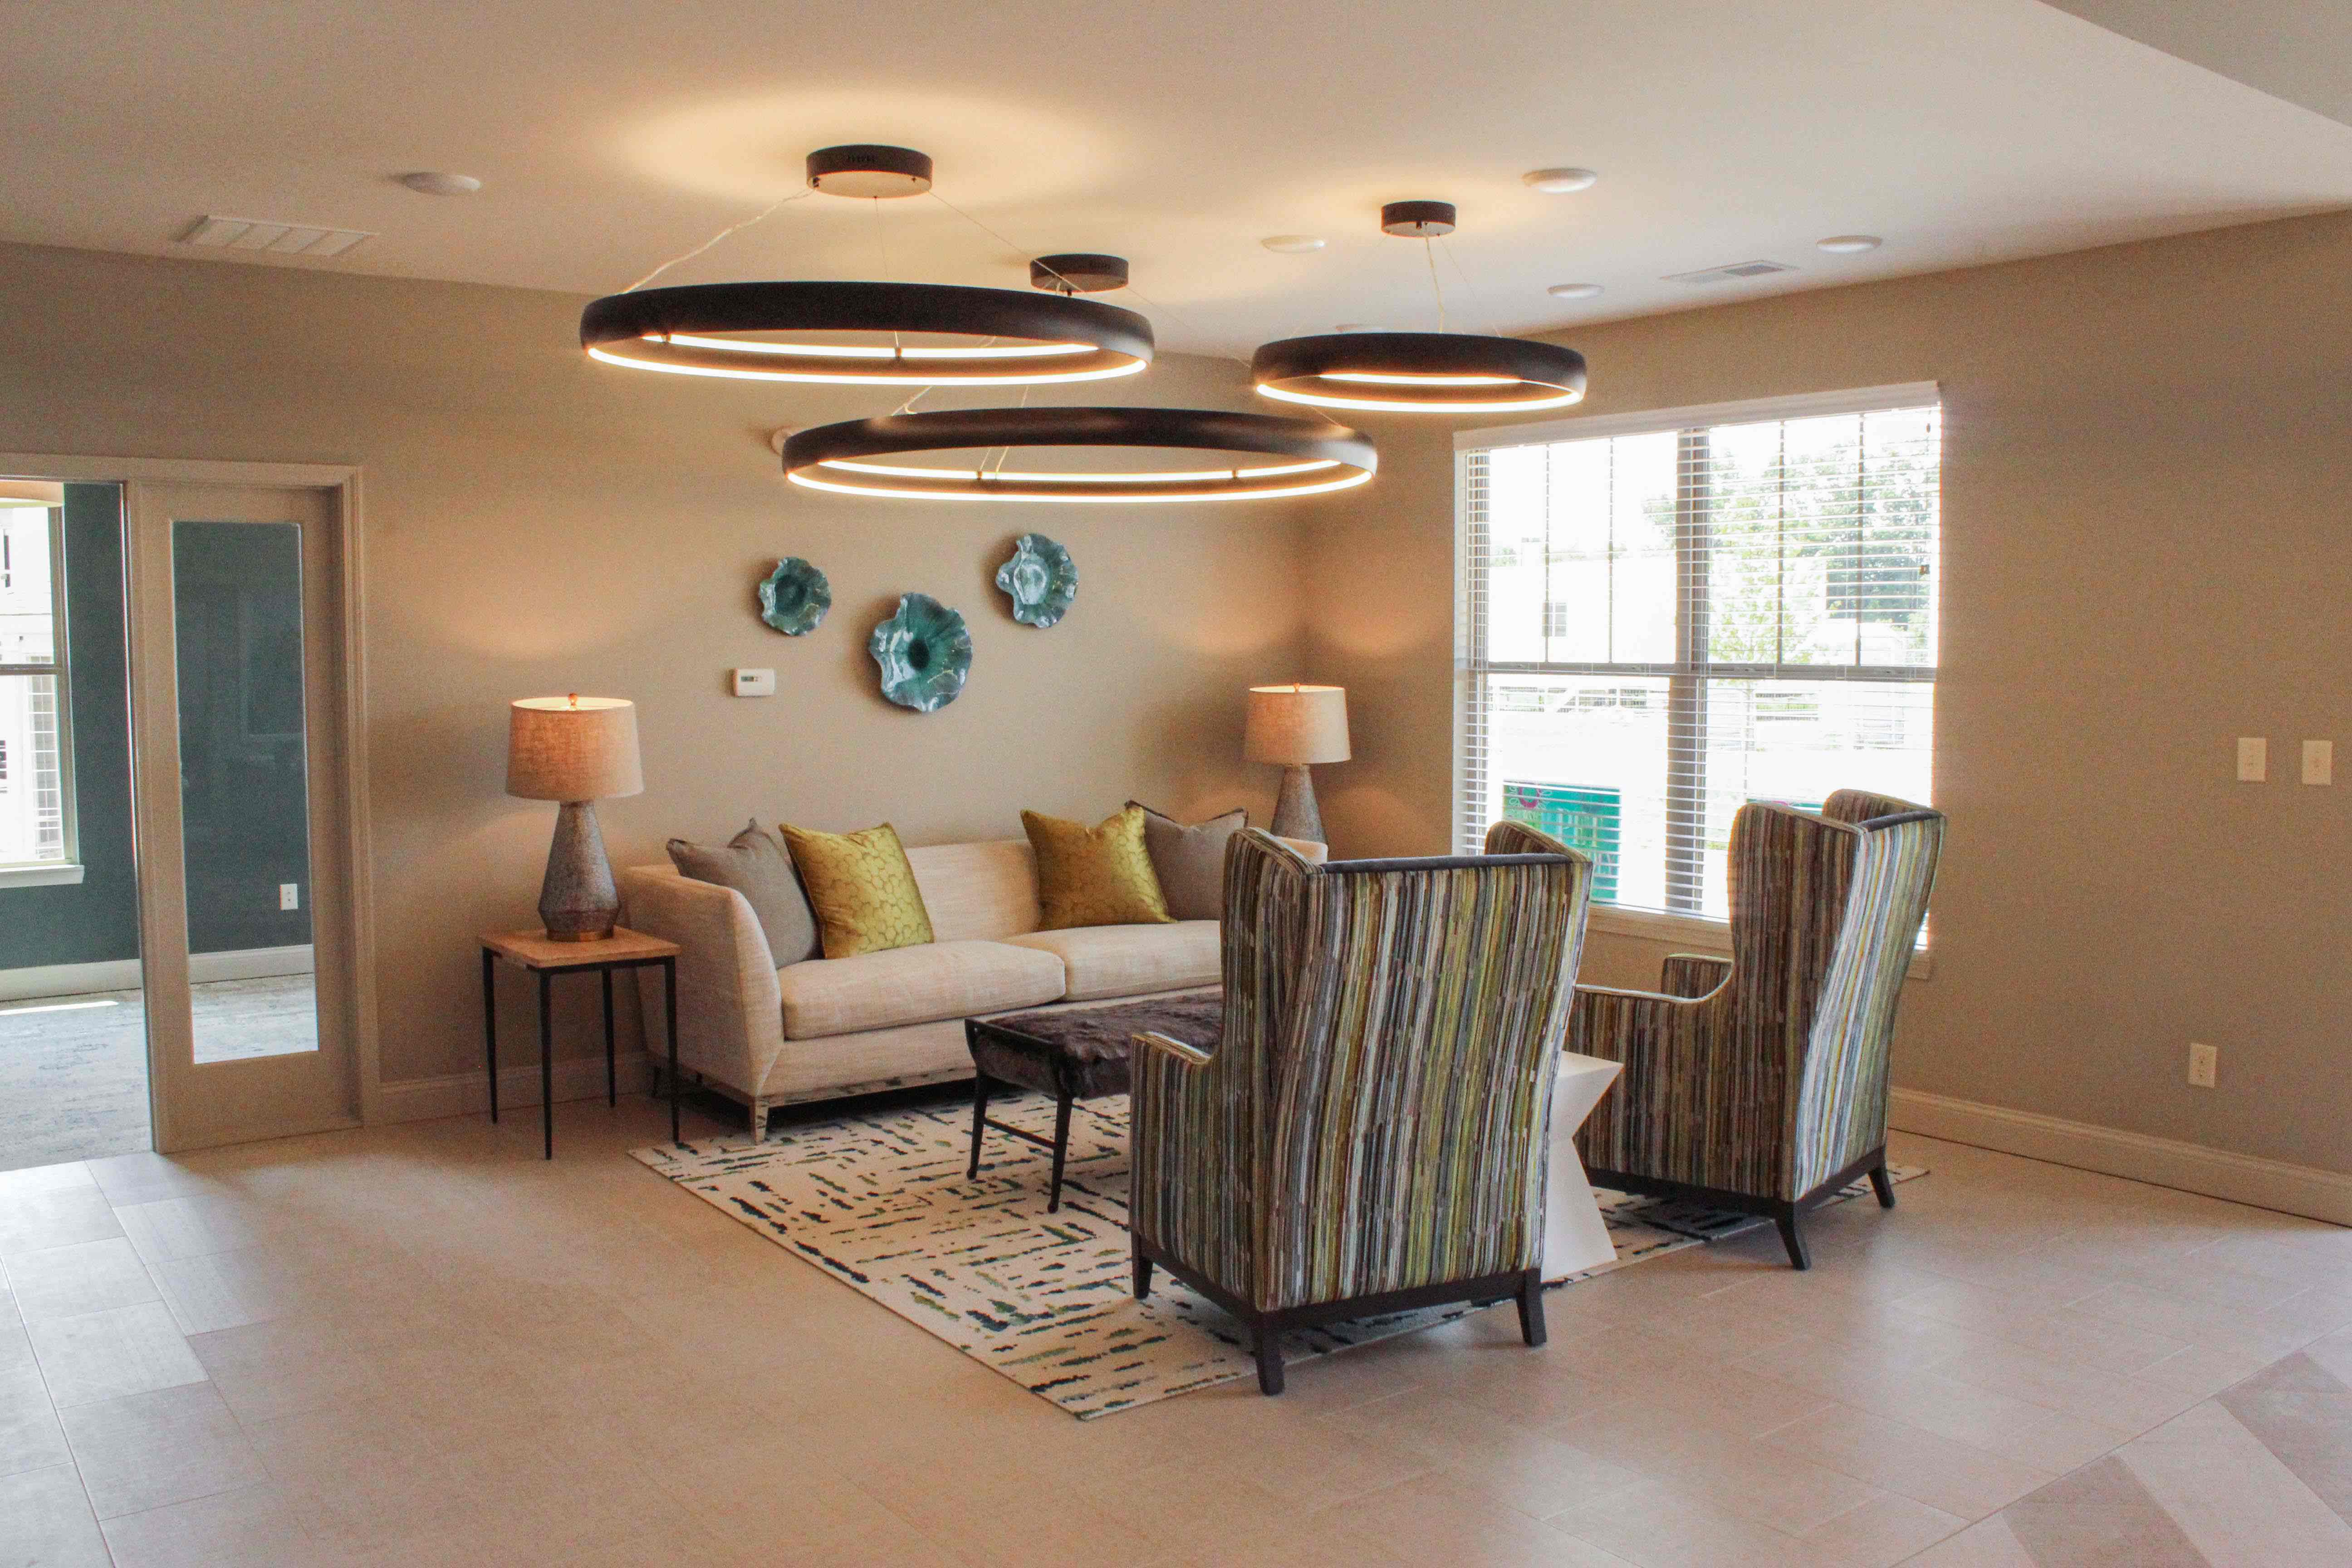 Living-Room shot of a Unit at Villas of Jeffersonville. Ceiling lights and a sofa and two chairs.